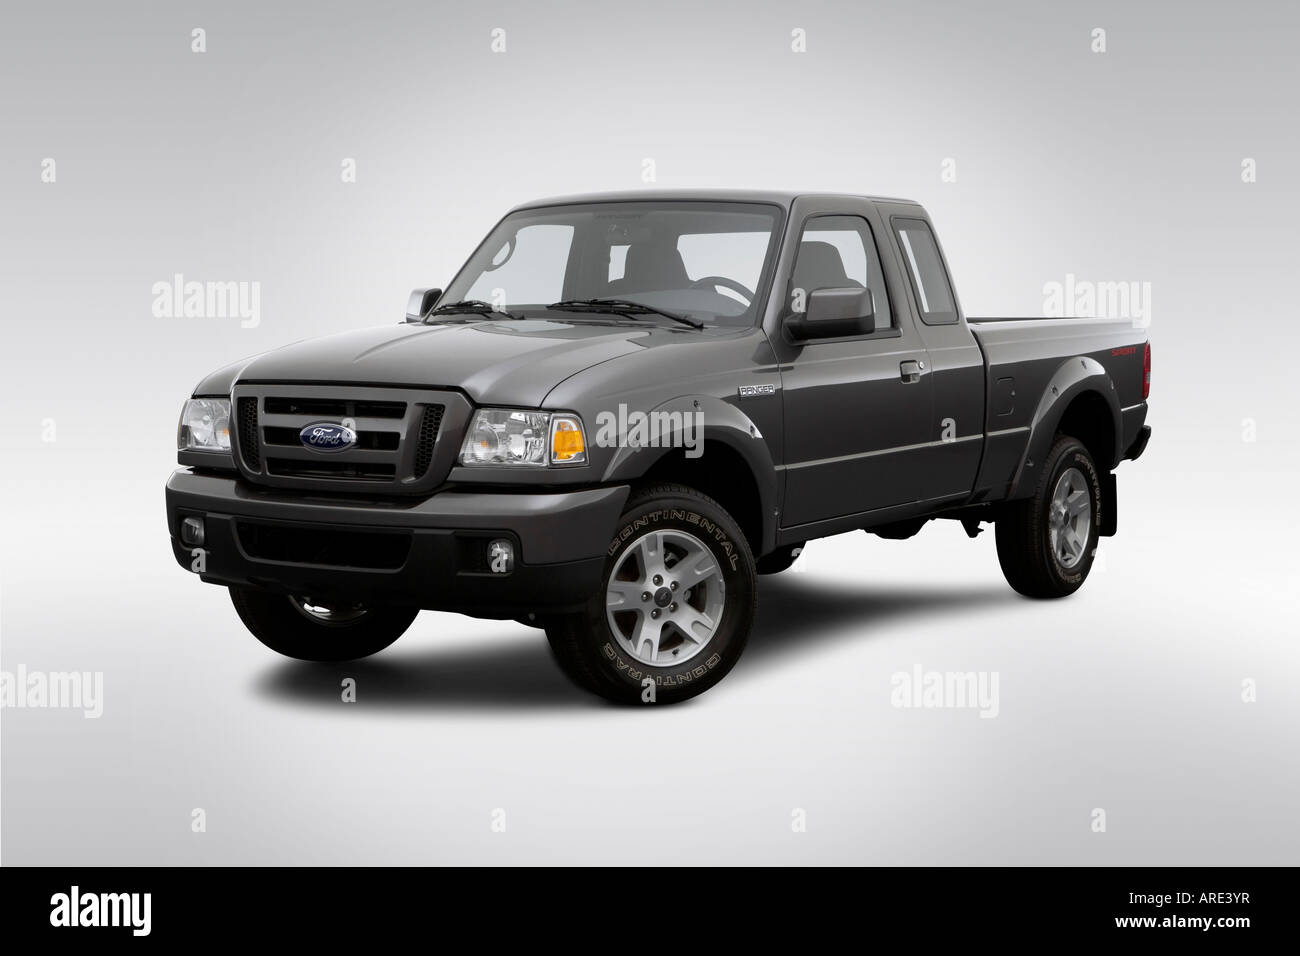 2006 Ford Ranger Sport in Gray - Front angle view Stock Photo - Alamy